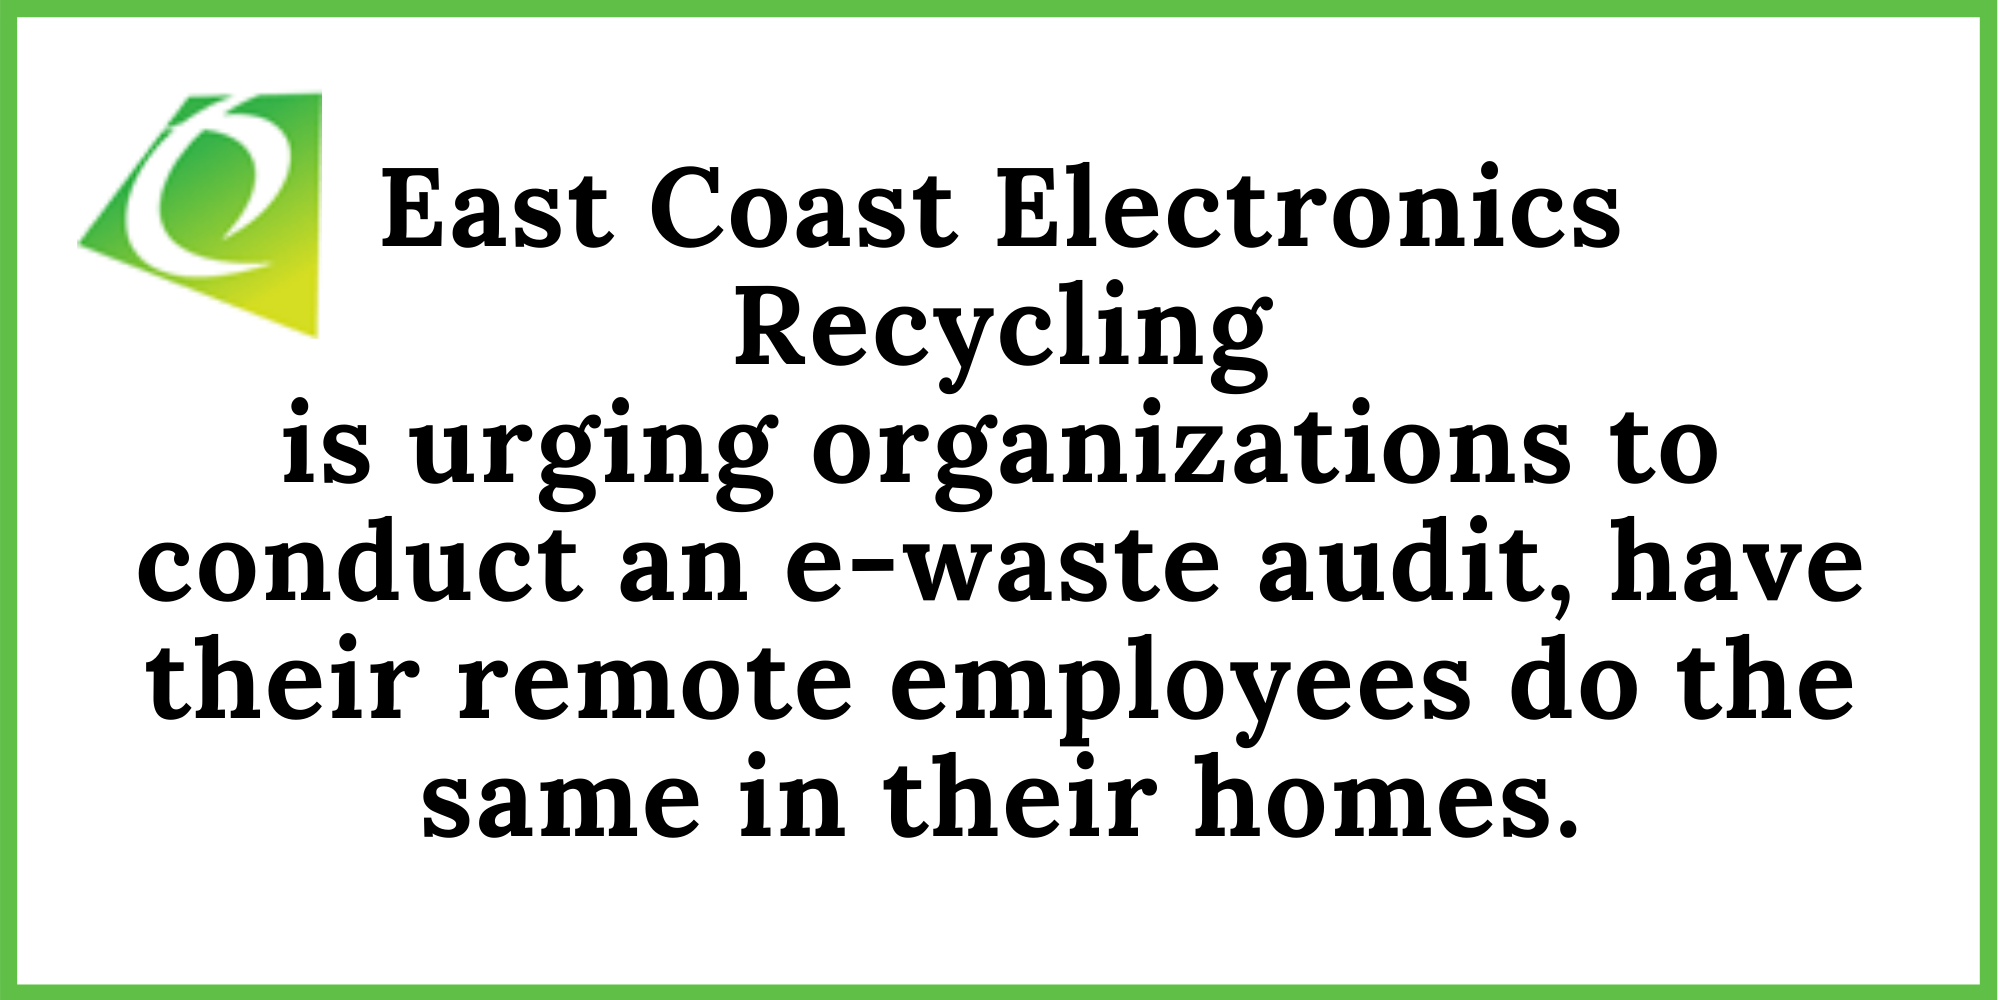 East Coast Electronics Recycling , Tuesday, January 12, 2021, Press release picture